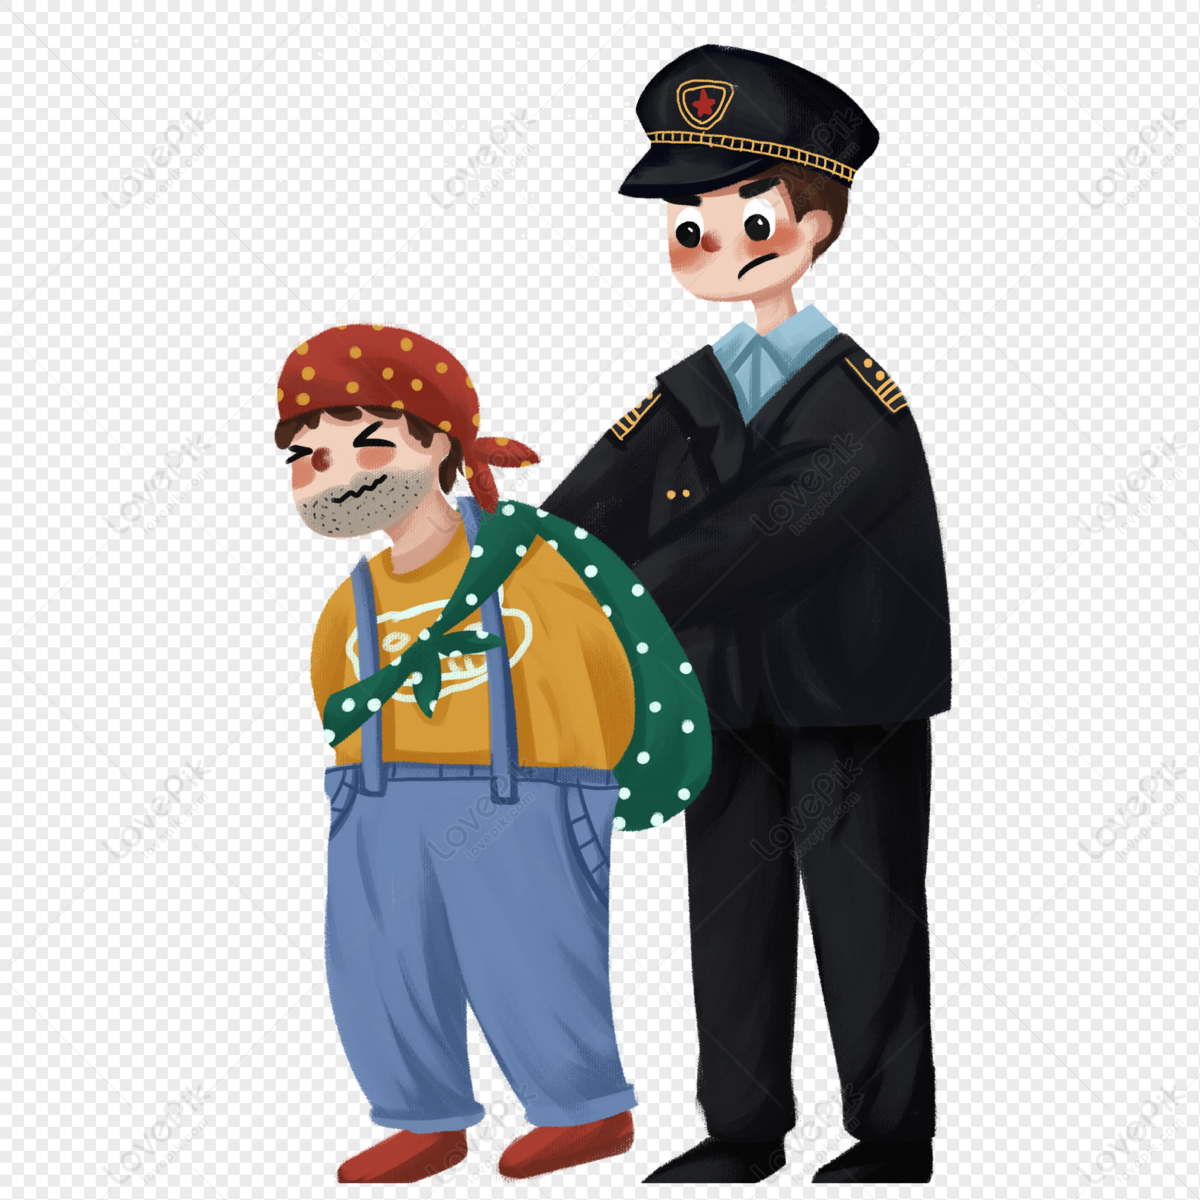 Police Catch Thief Free PNG And Clipart Image For Free Download - Lovepik |  401410379